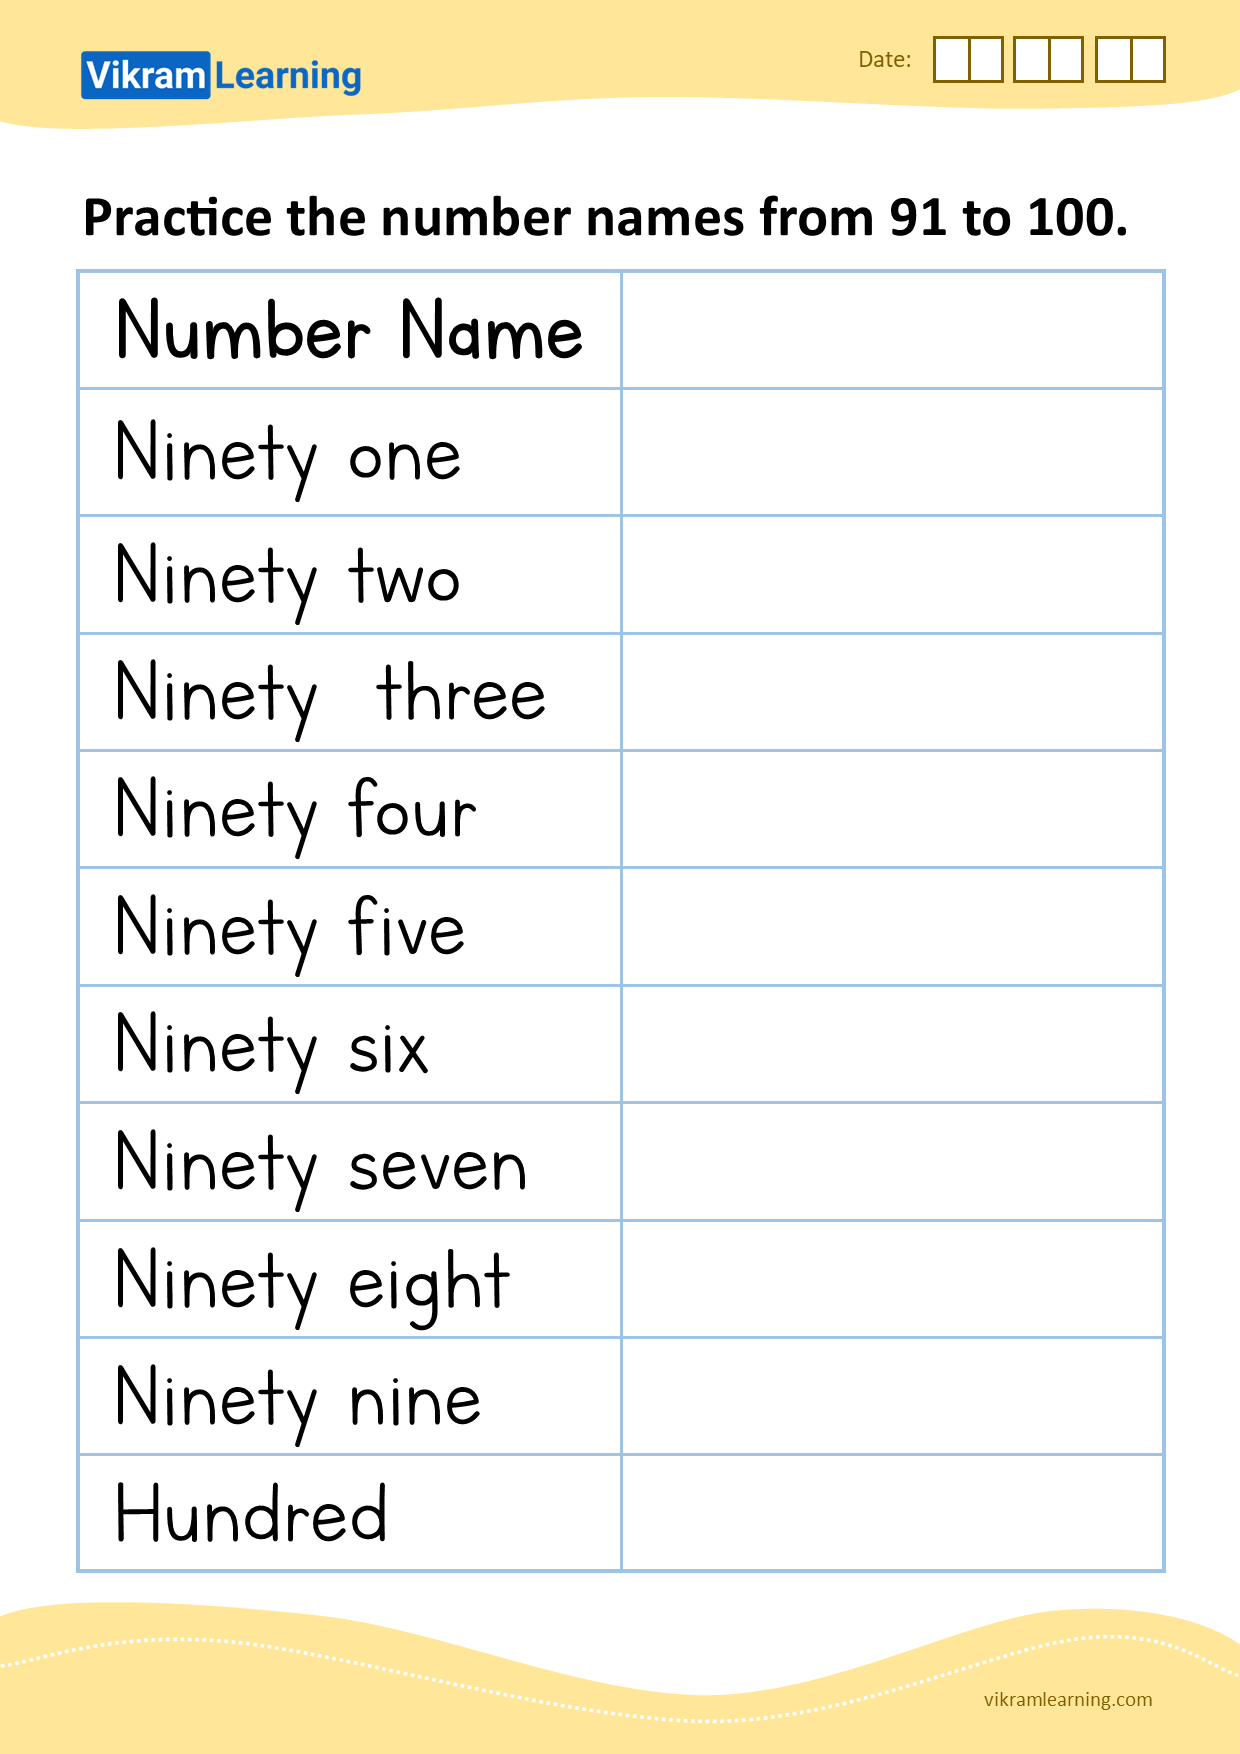 Download practice the number names from 91 to 100 worksheets